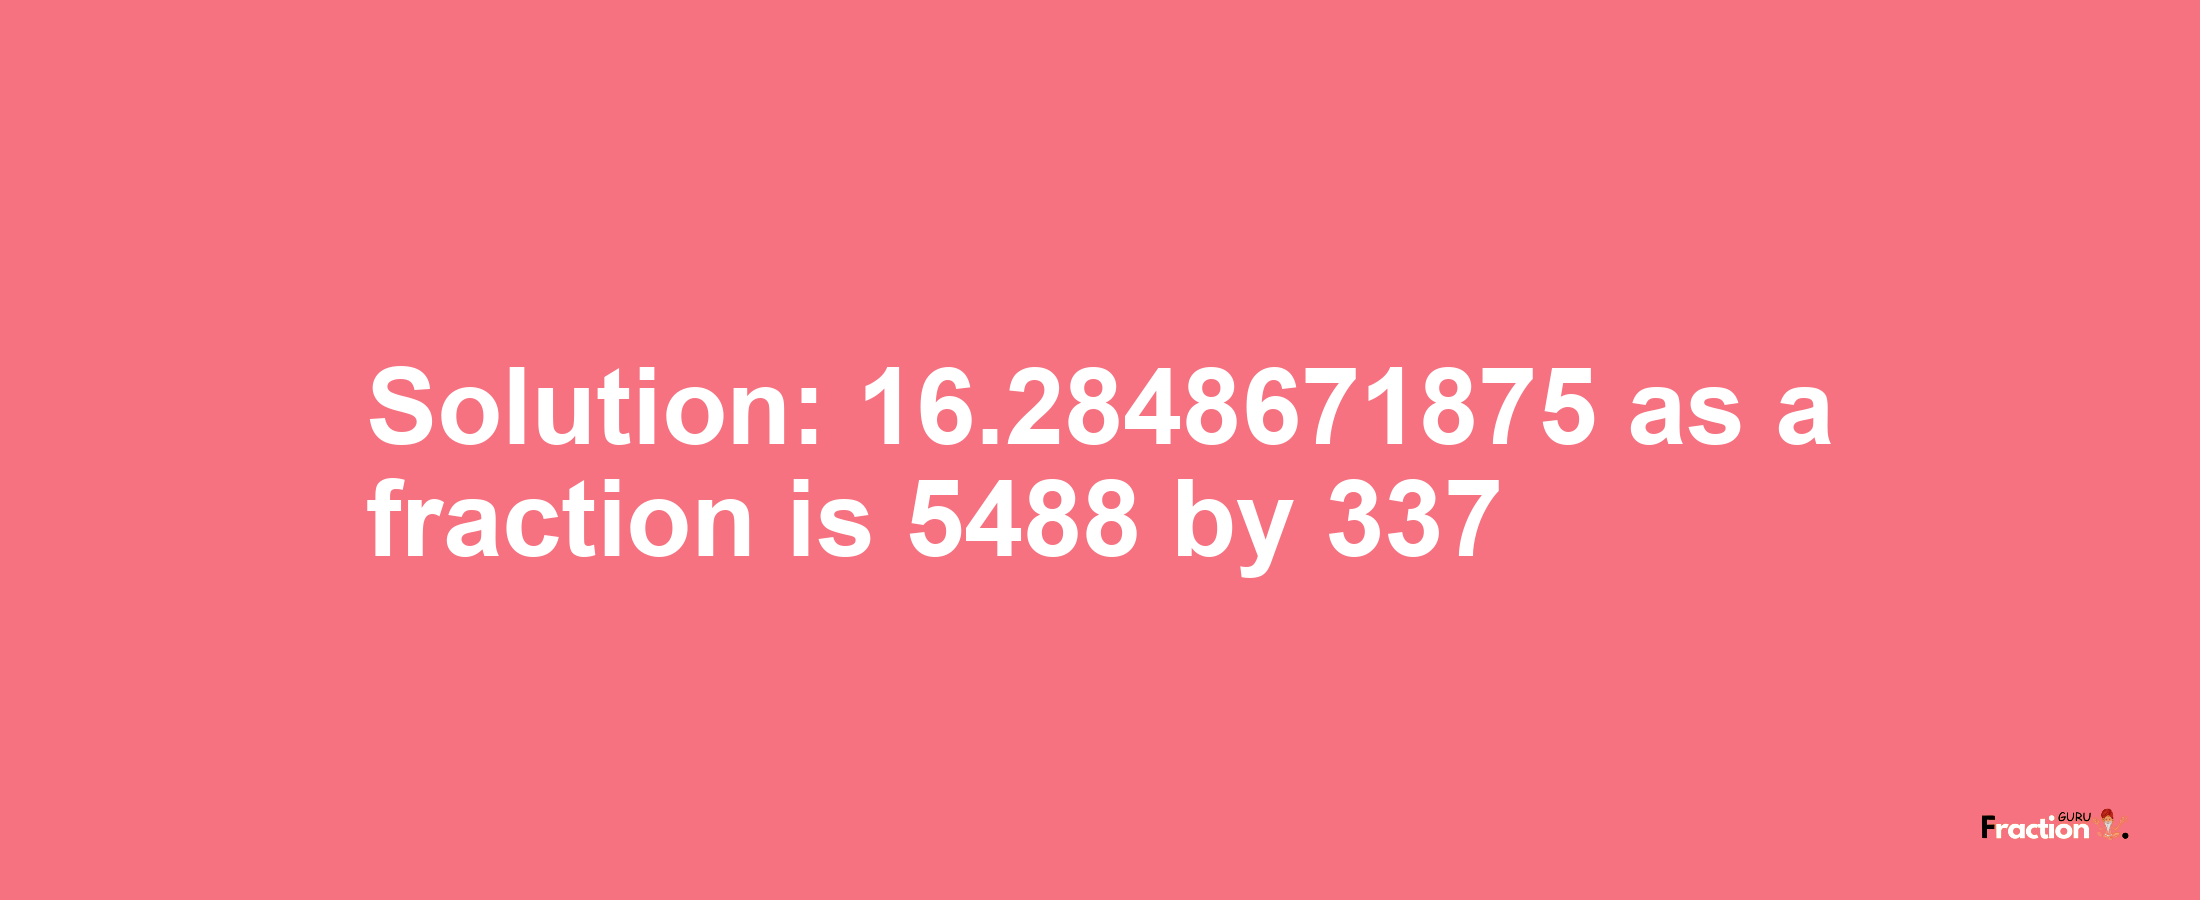 Solution:16.2848671875 as a fraction is 5488/337